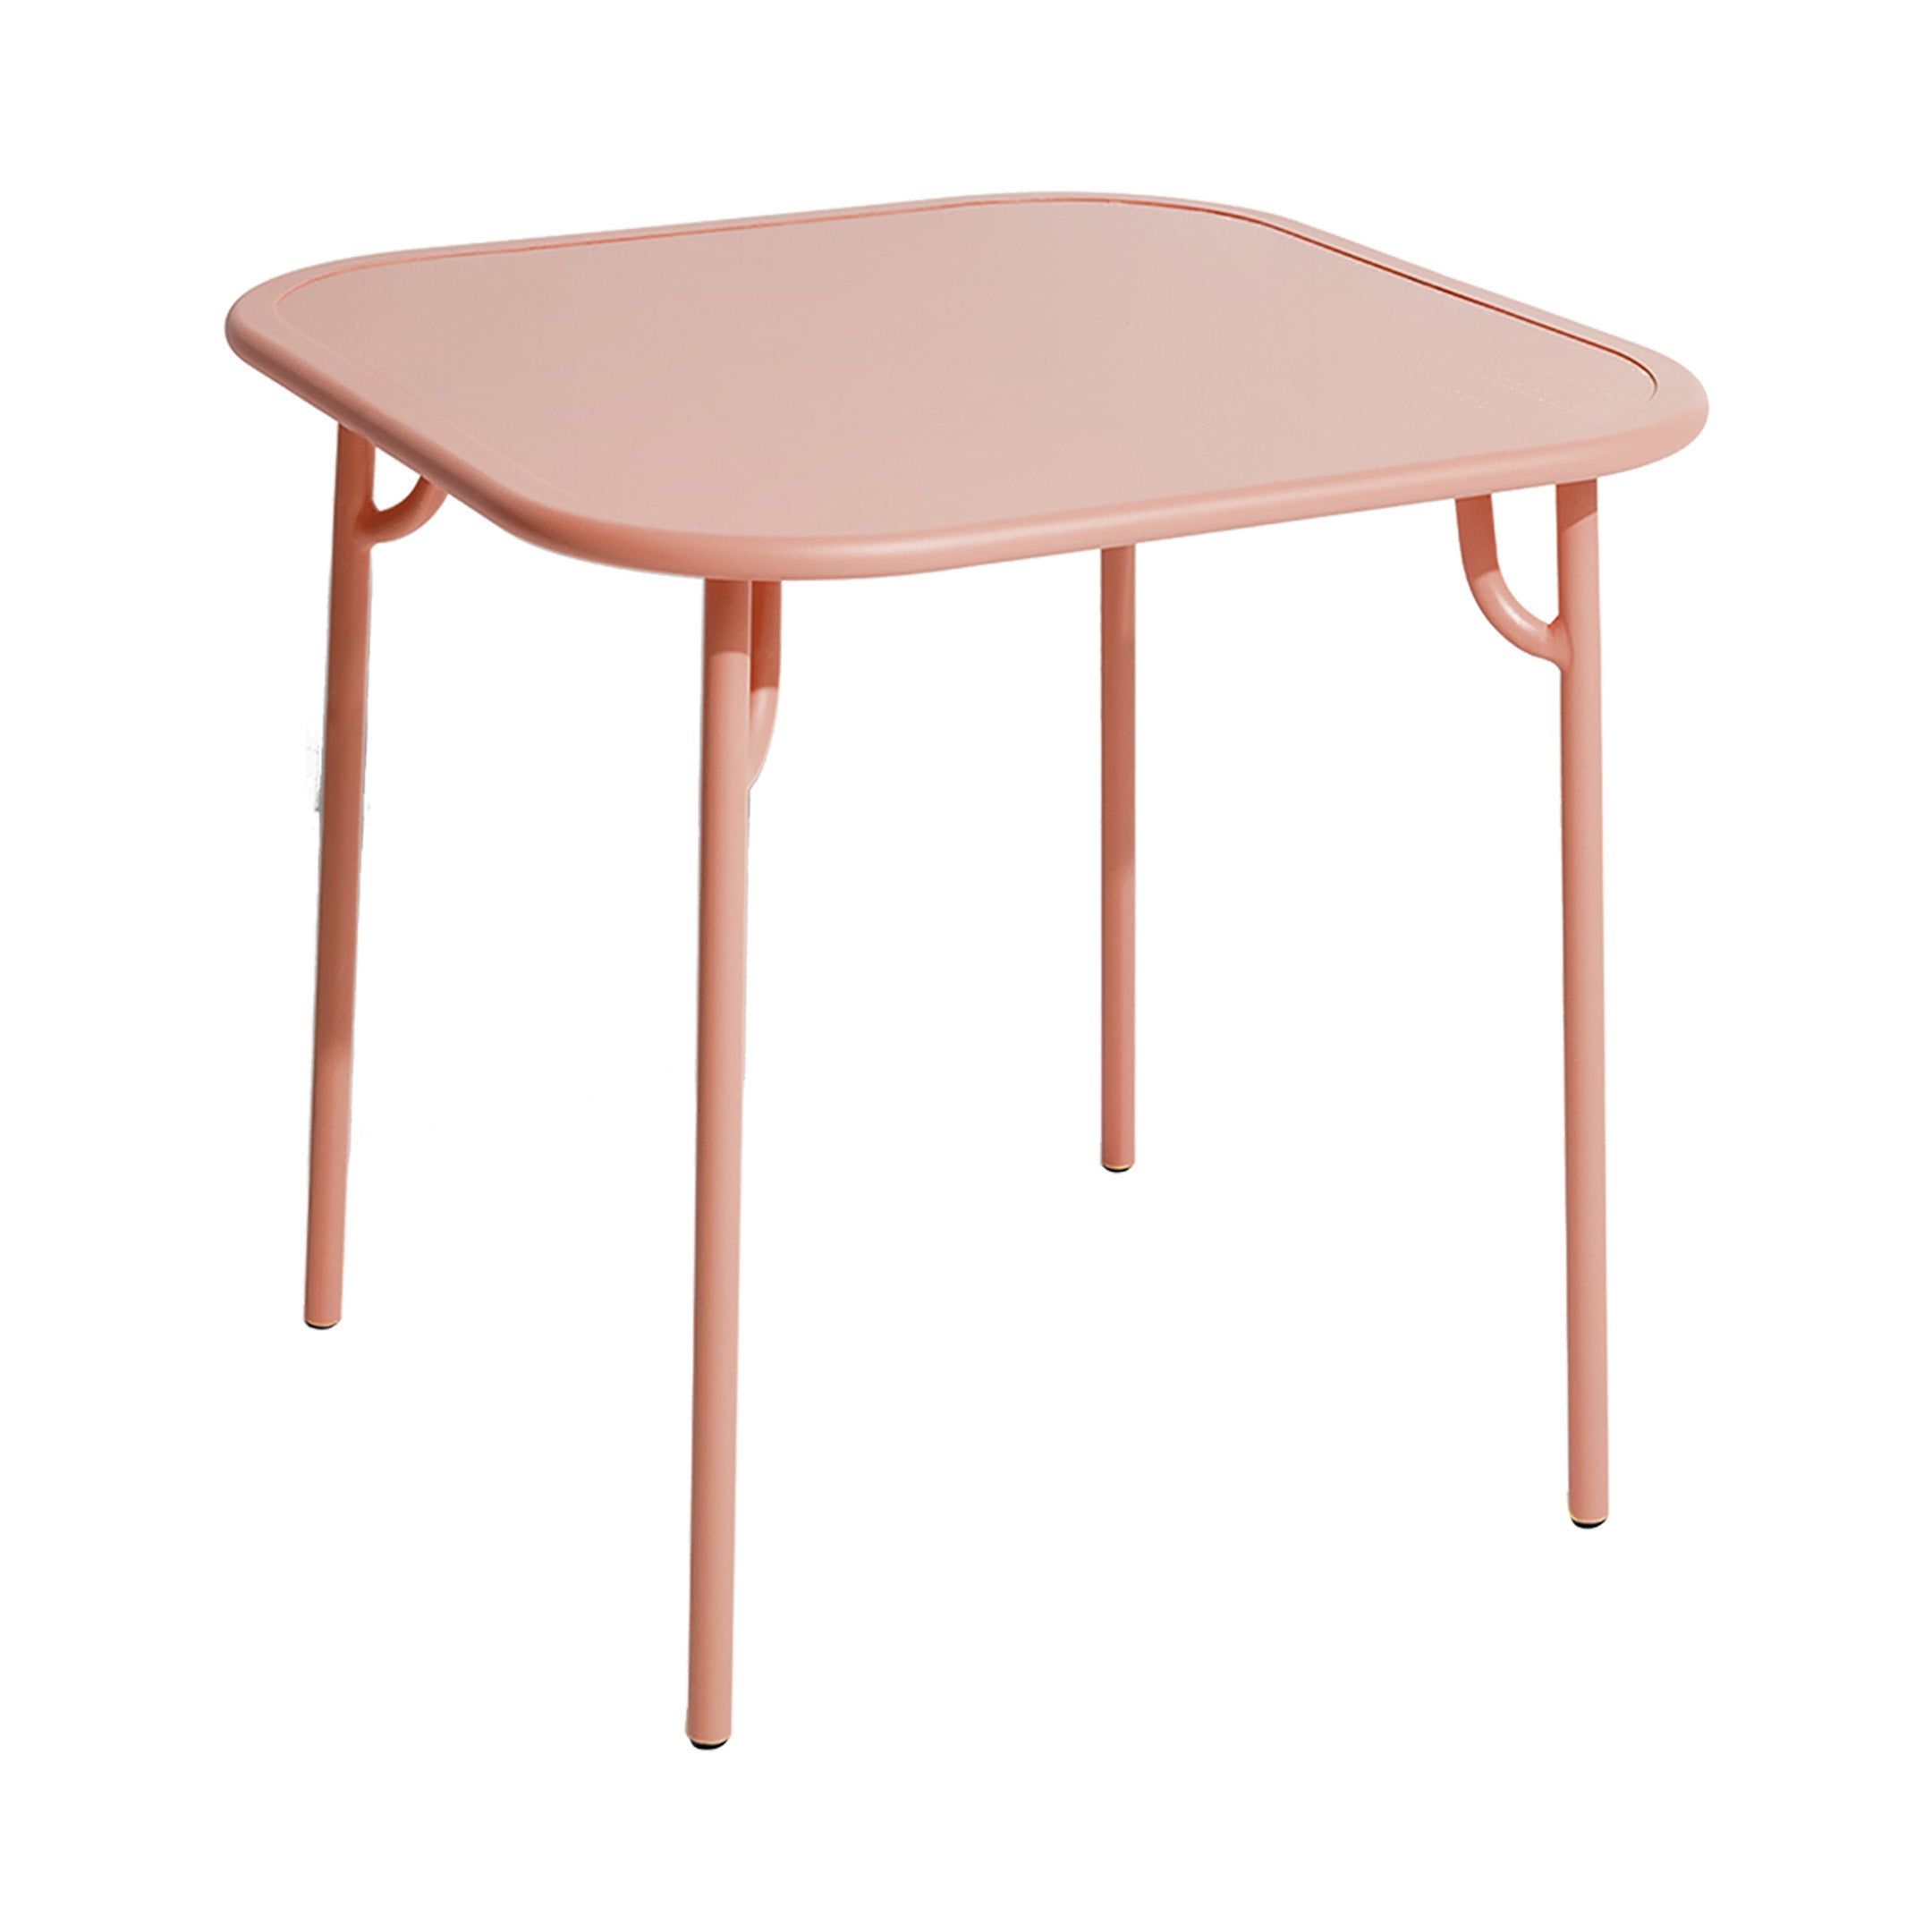 Week-End Square Dining Table: Blush